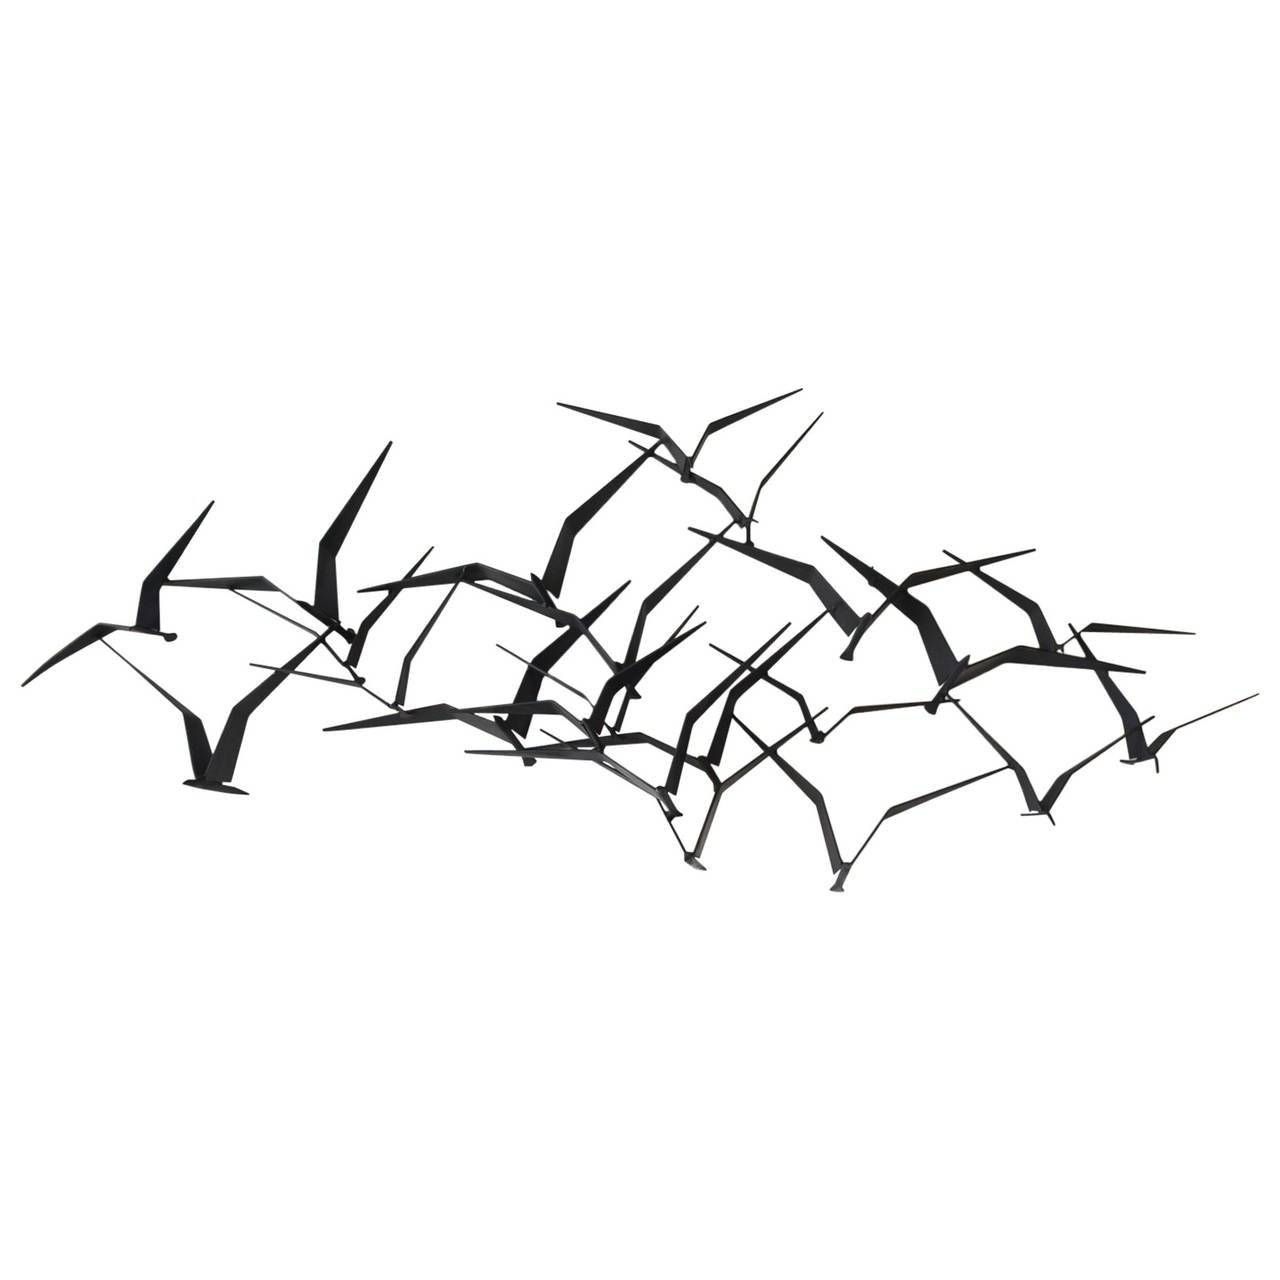 Curtis Jere Birds In Flight Metal Wall Sculpture At 1stdibs Within Most Up To Date Birds In Flight Metal Wall Art (View 28 of 30)